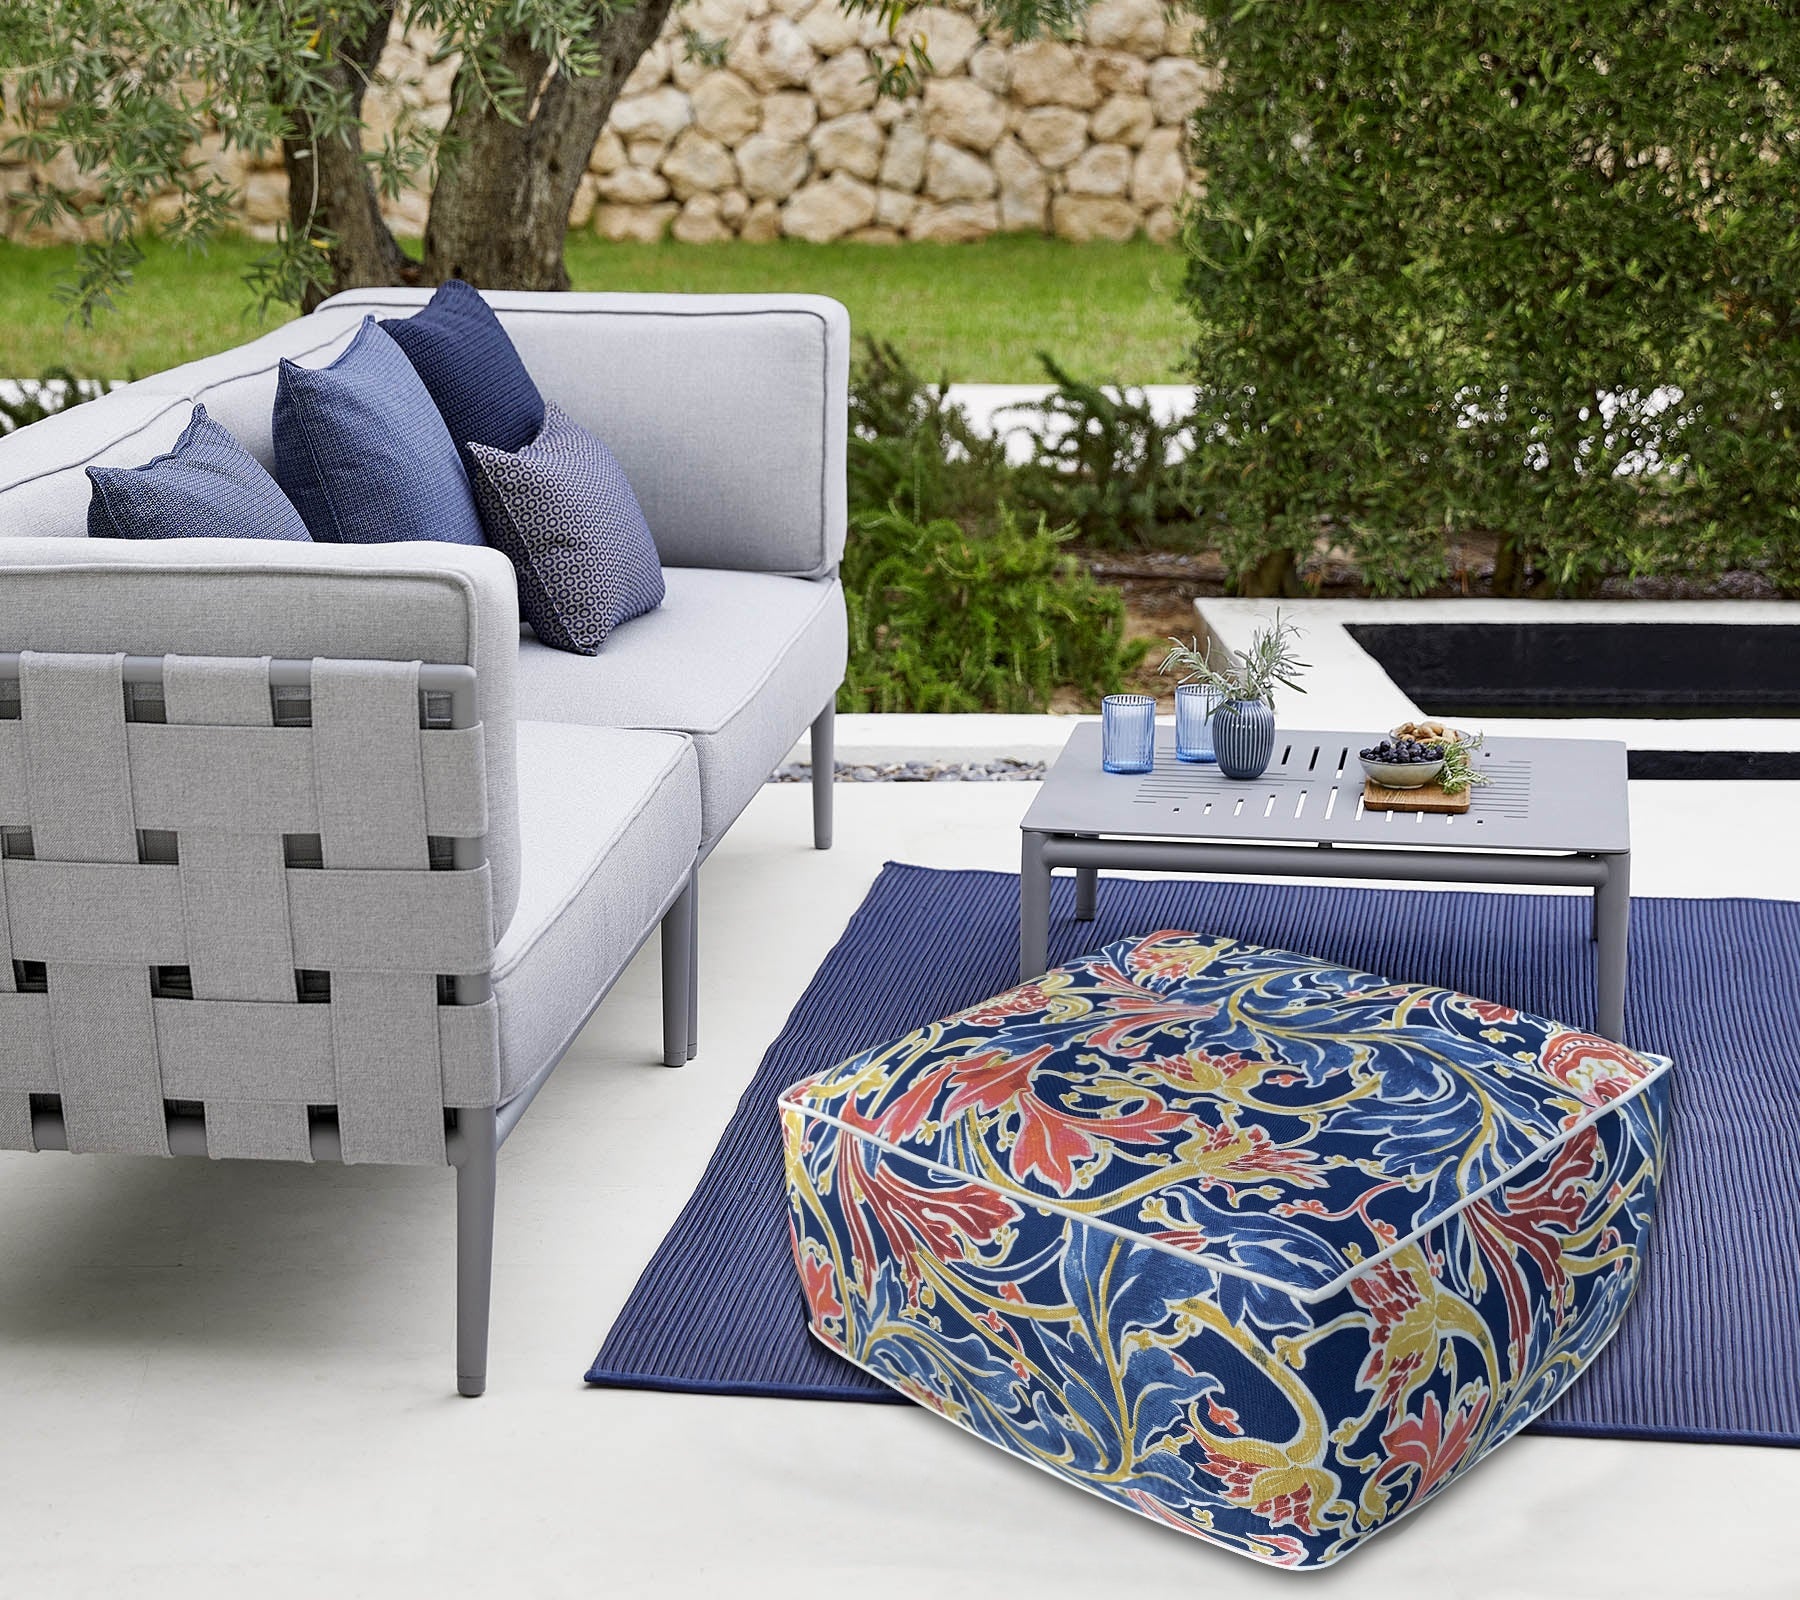 Outdoor Inflatable Ottoman Navy Jacobean Square 23x23x9 Inch Patio Foot Stools and Ottomans